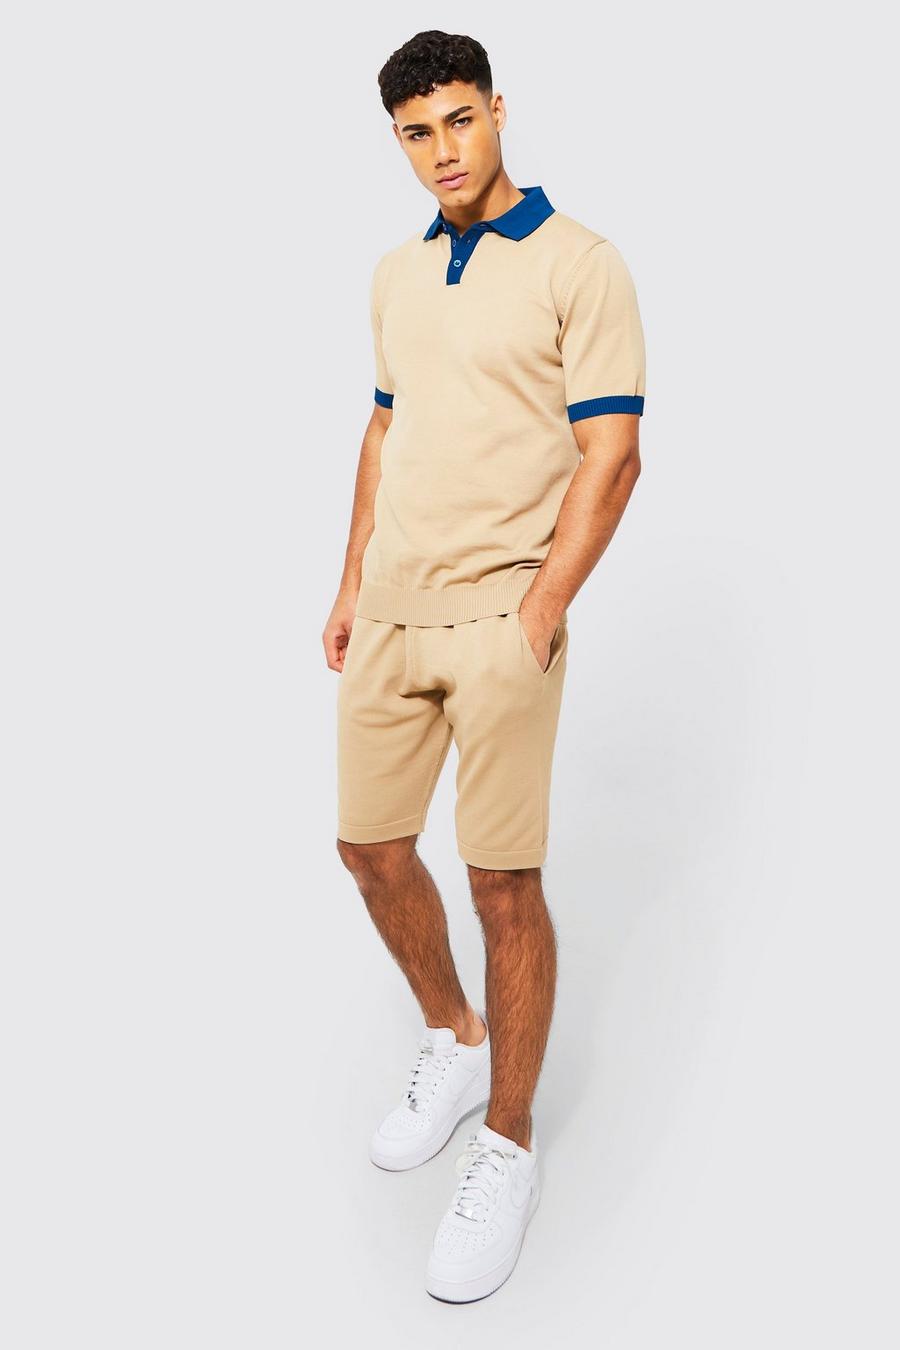 Taupe beige Short Sleeve Contrast Knit Polo & Shorts Set